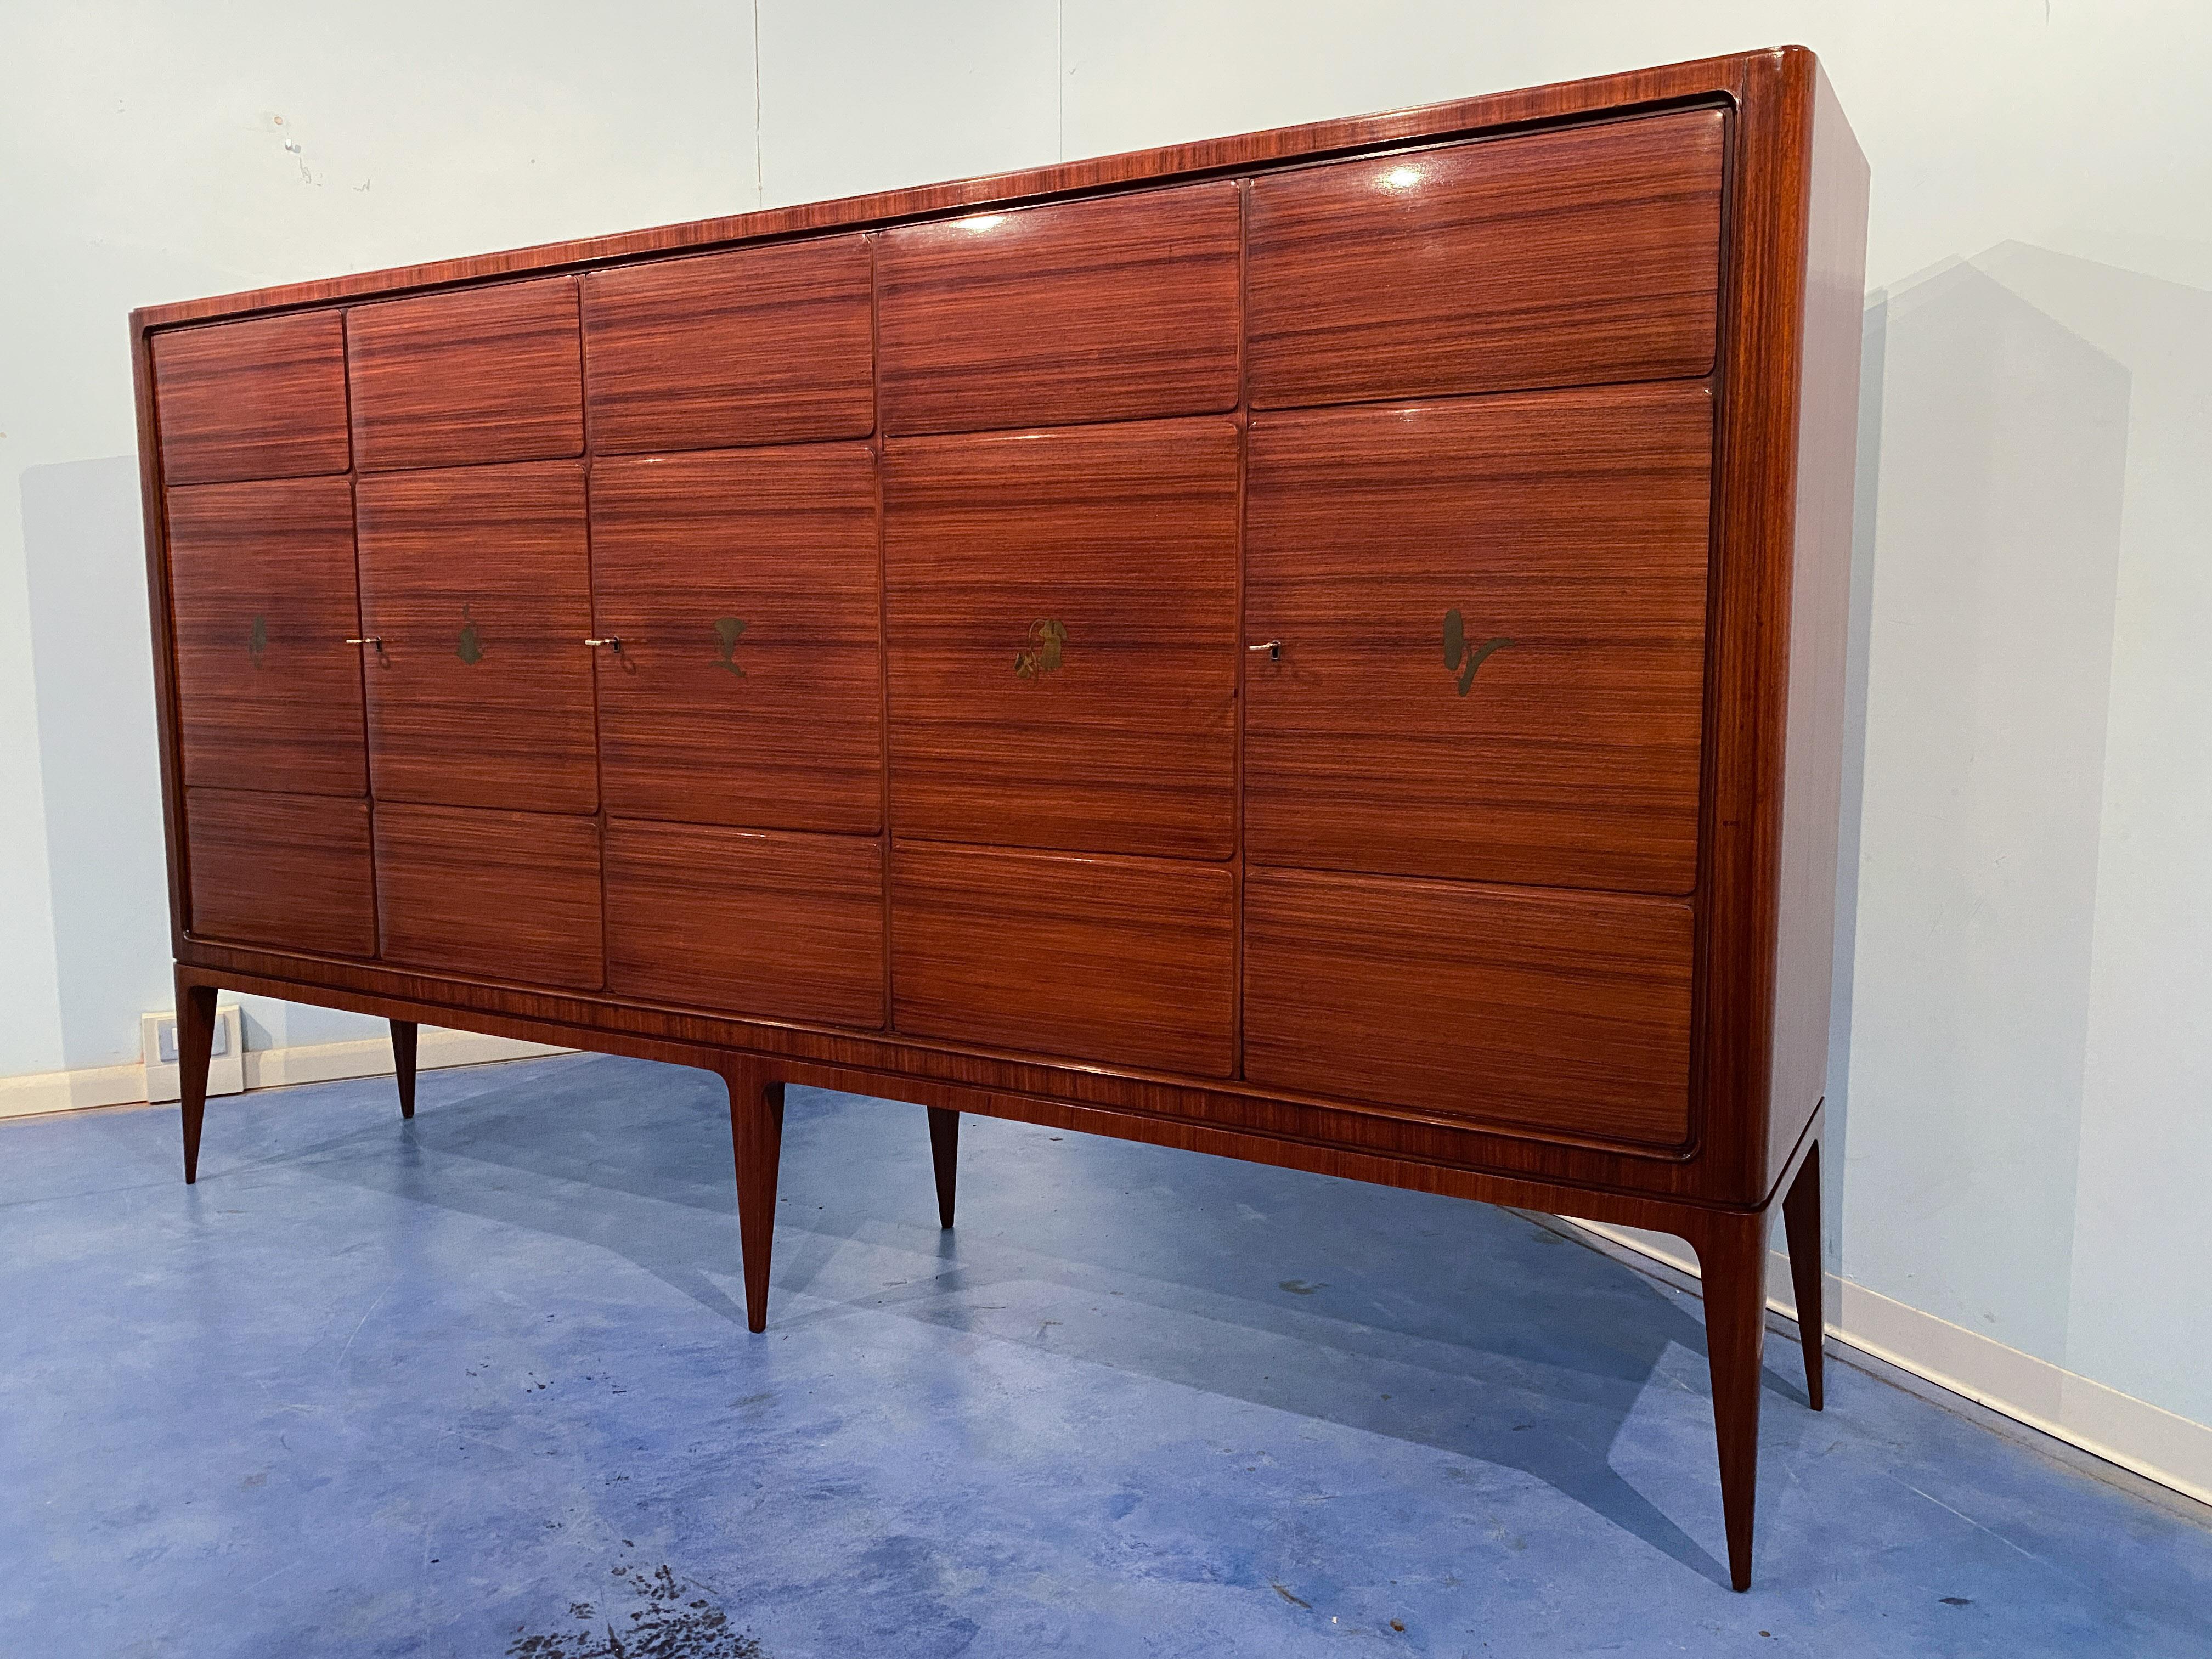 Italian Mid-Century Modern Tall Sideboard Cabinet Designed by Paolo Buffa, 1950 For Sale 1